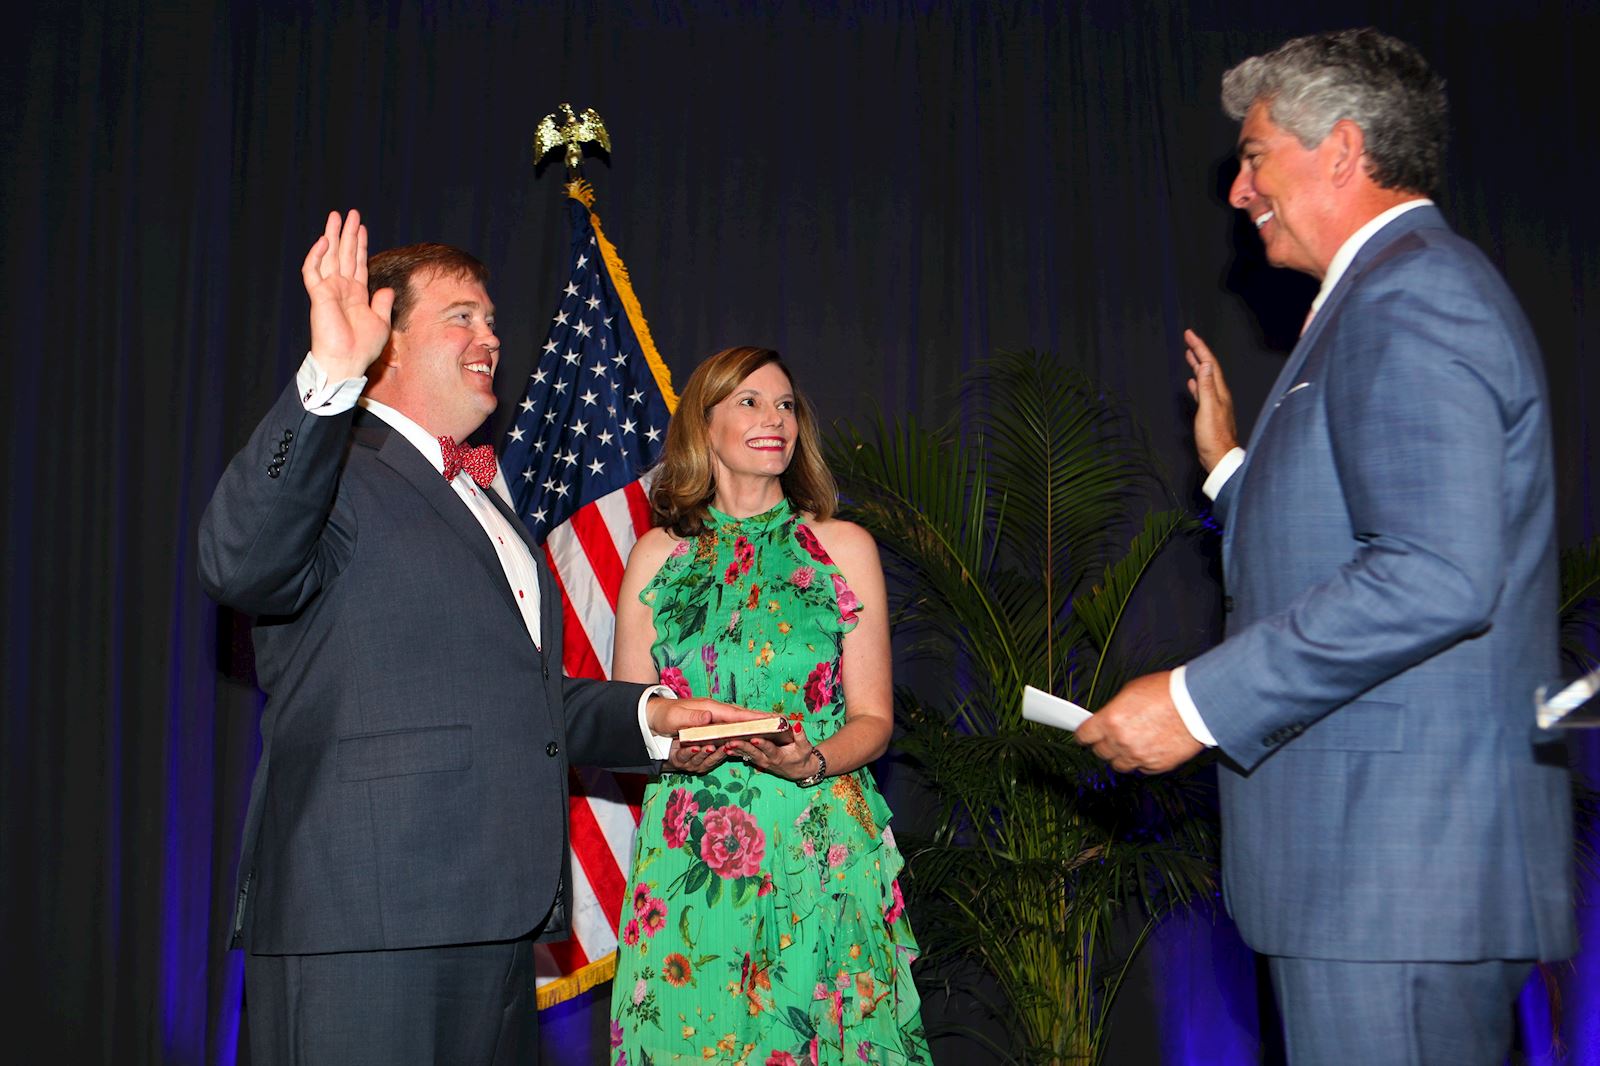 Ivy N. Cadle of Baker Donelson in Macon and Atlanta was installed June 8 as the 62nd president of the 55,000-member State Bar of Georgia during the organization's Annual Meeting at Amelia Island.